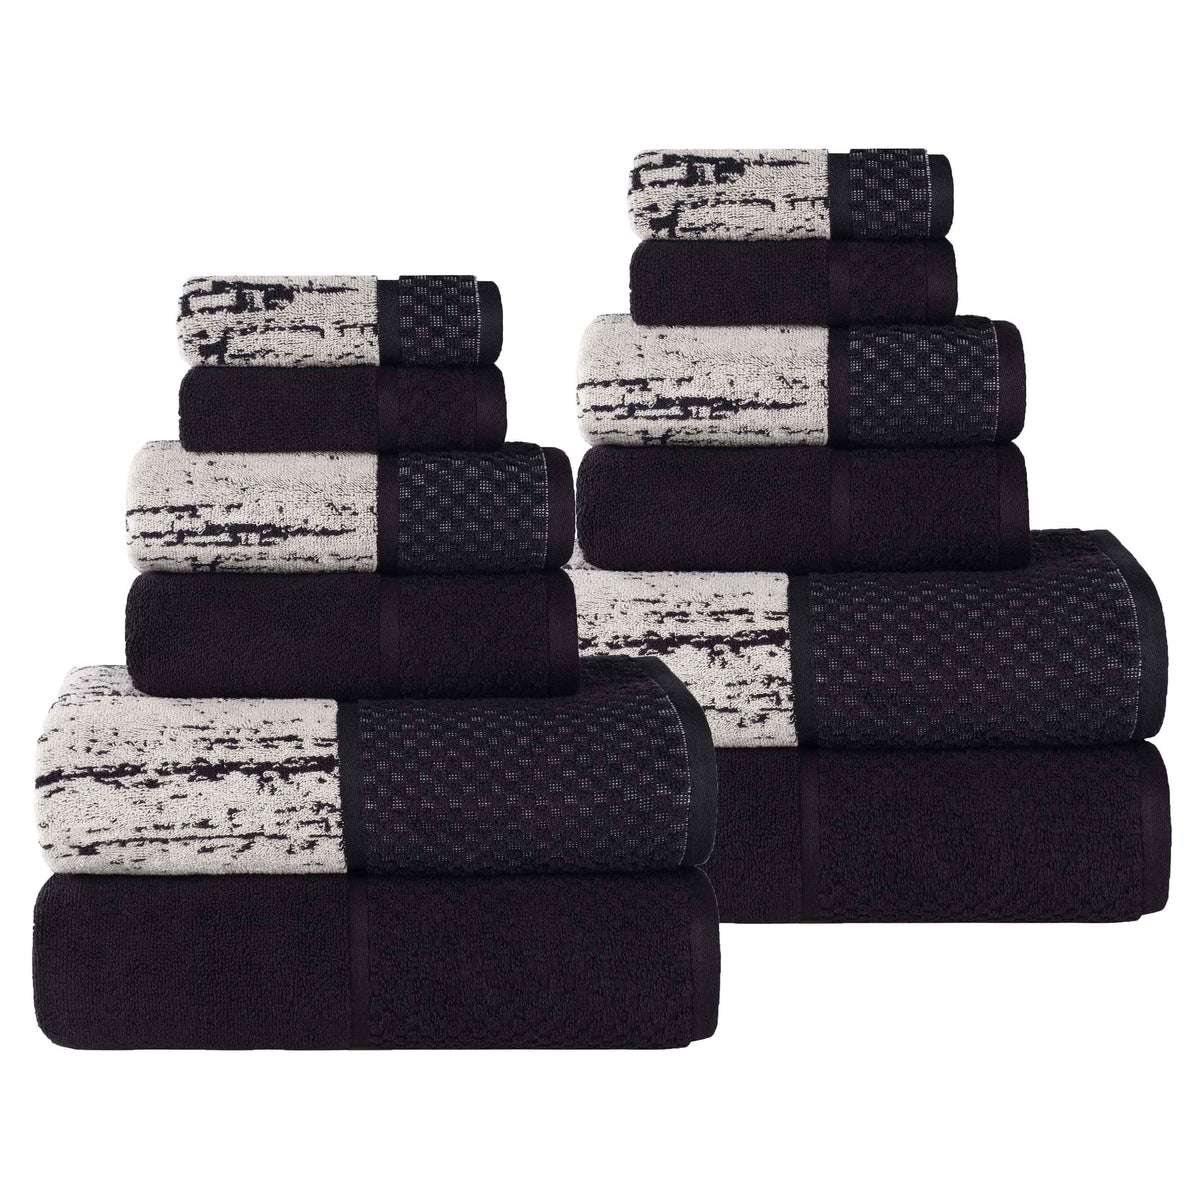 Lodie Cotton Jacquard Solid and Two-Toned 12 Piece Assorted Towel Set - Black-Ivory